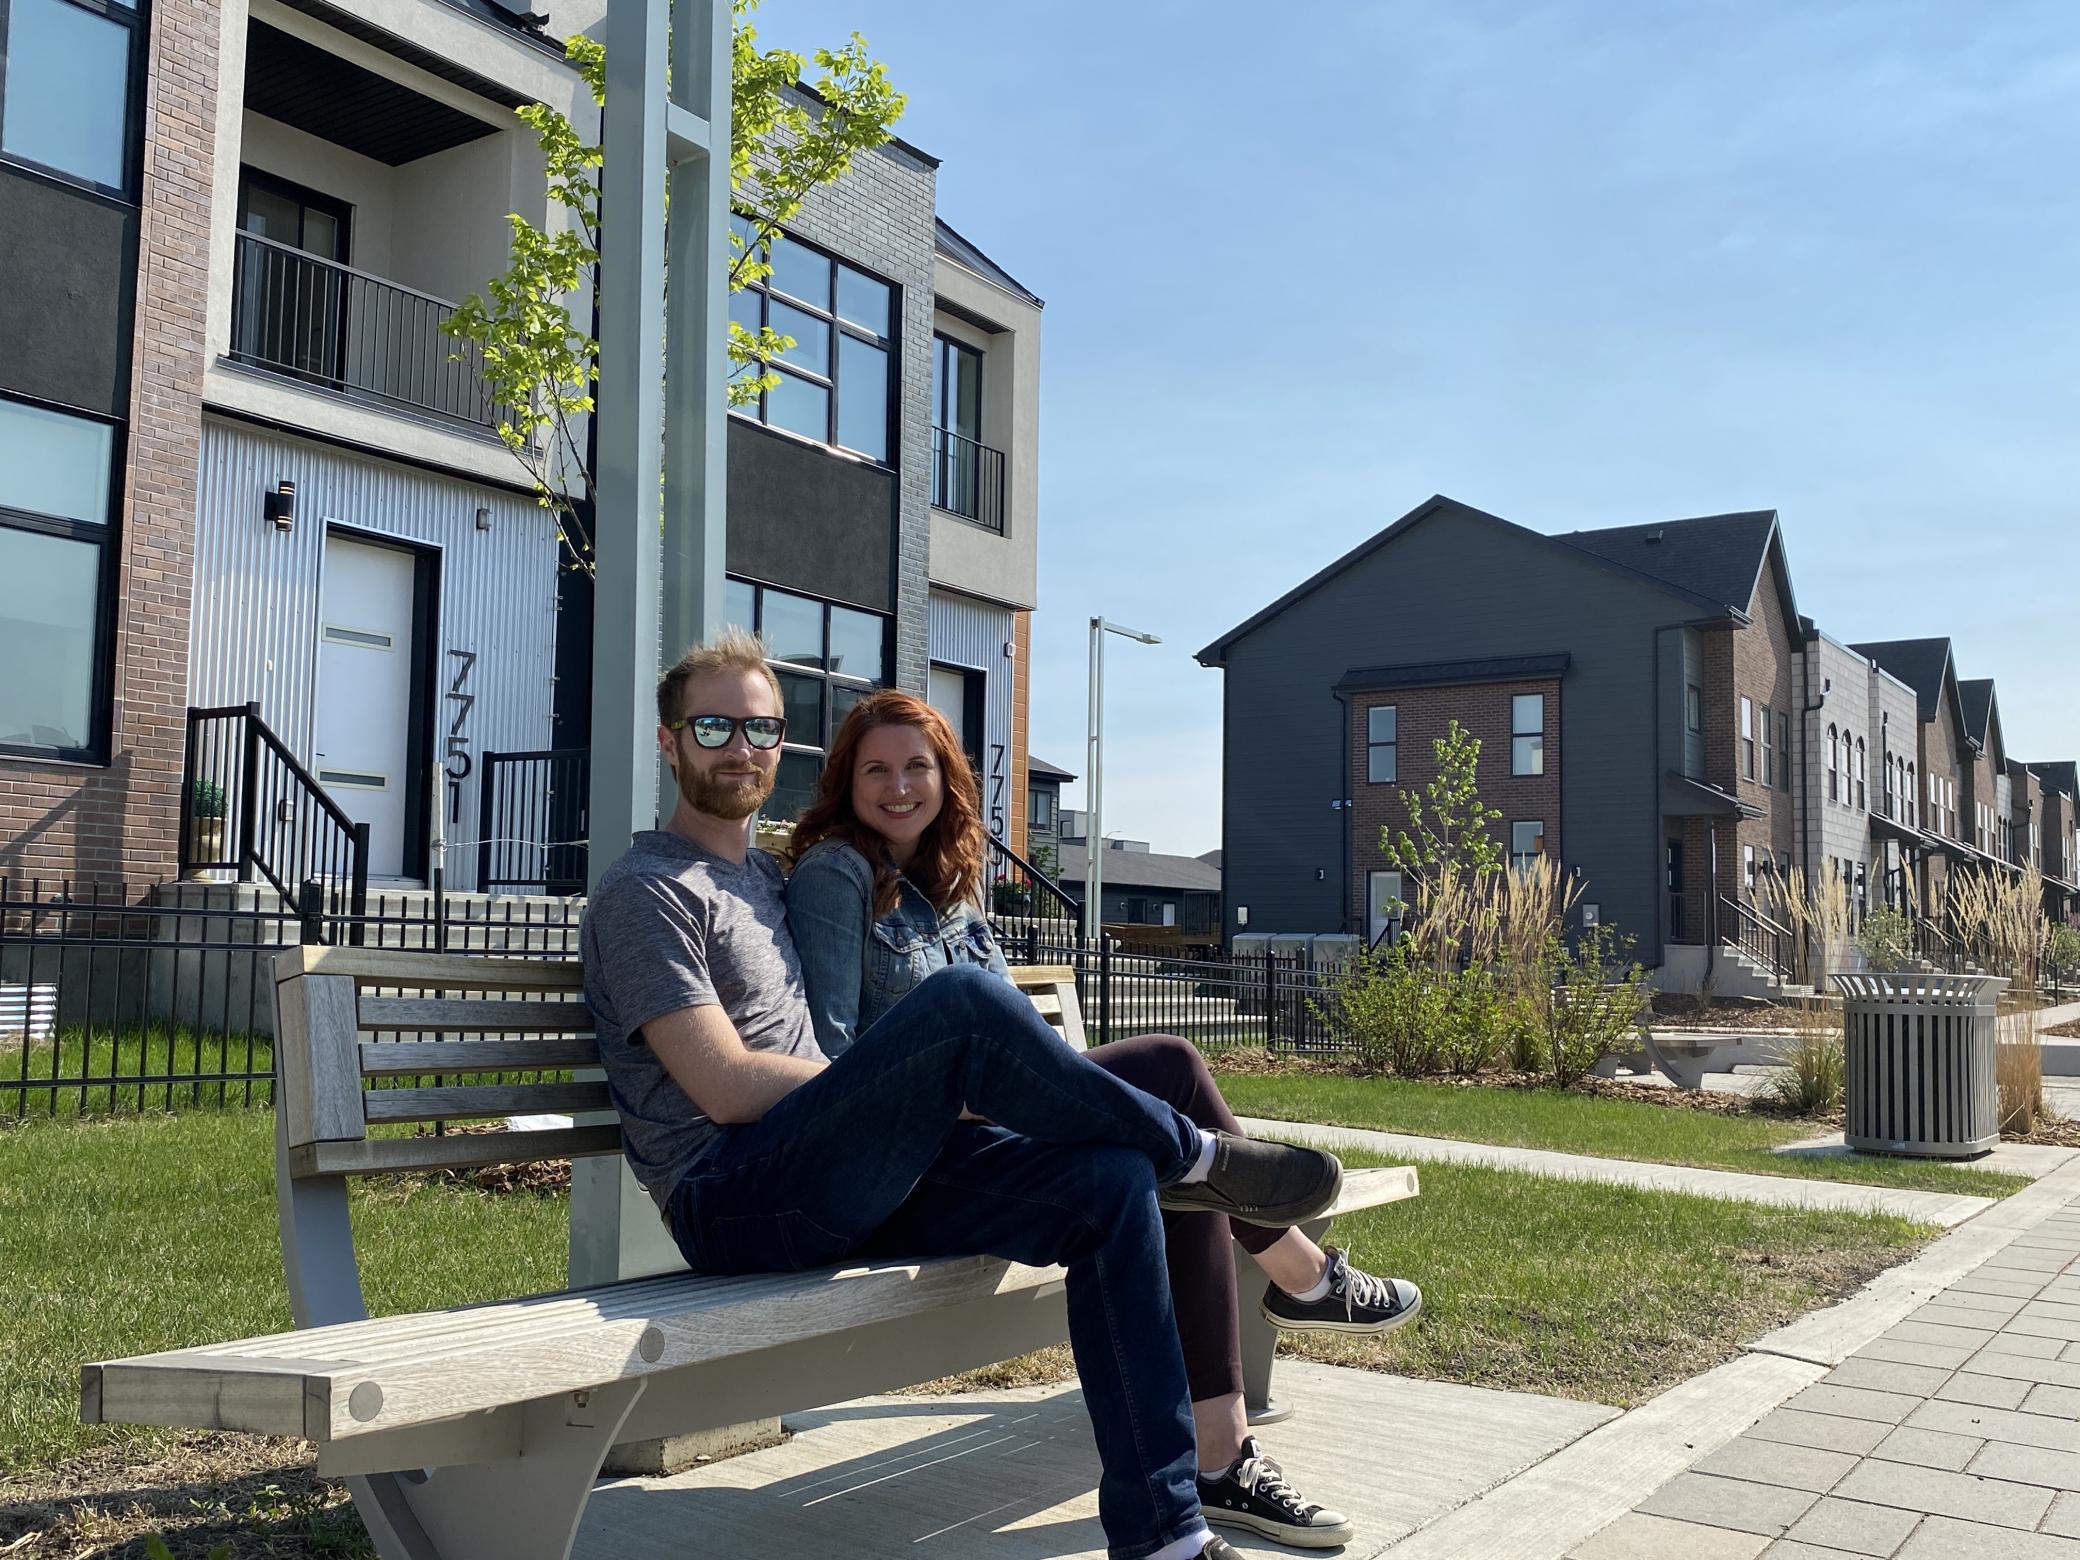 A couple sitting on a bench in front of homes